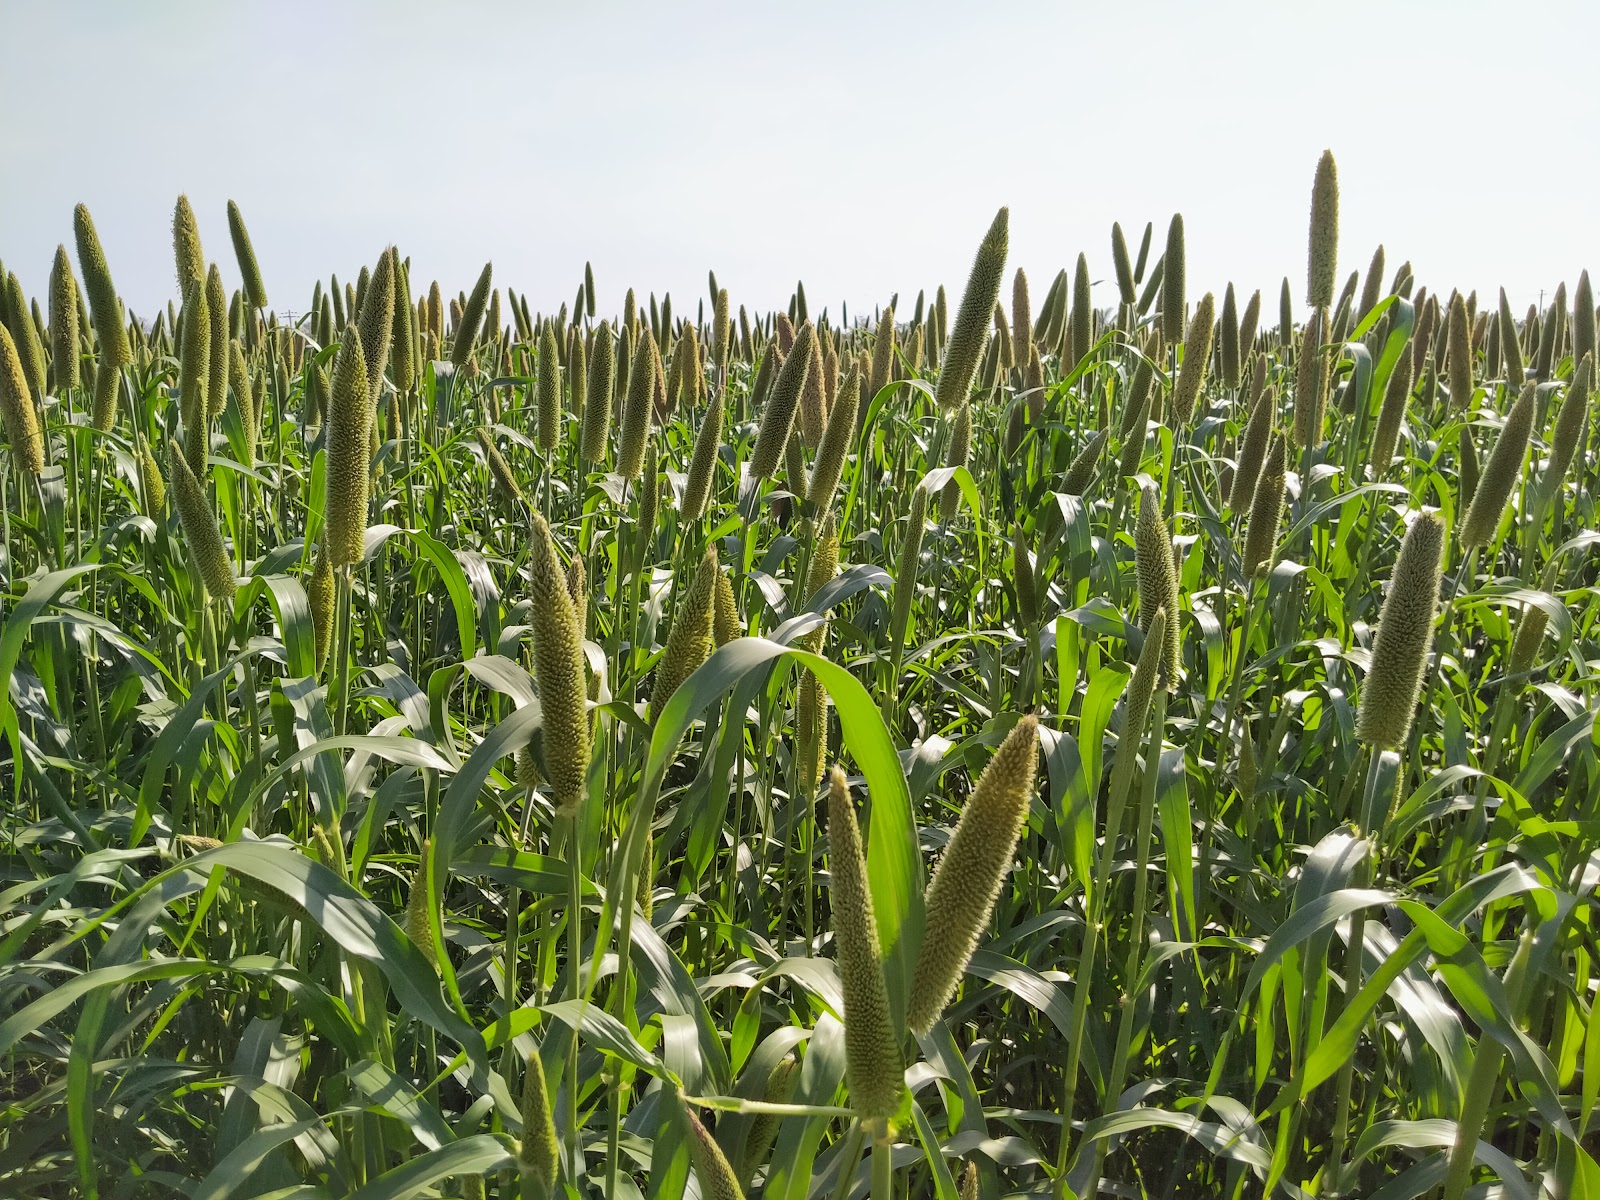 A field of pearl millet crop. Pearl millet is the major rabi crop in Mukkanal village in Raichur, cultivated mainly for self consumption and for livestock.